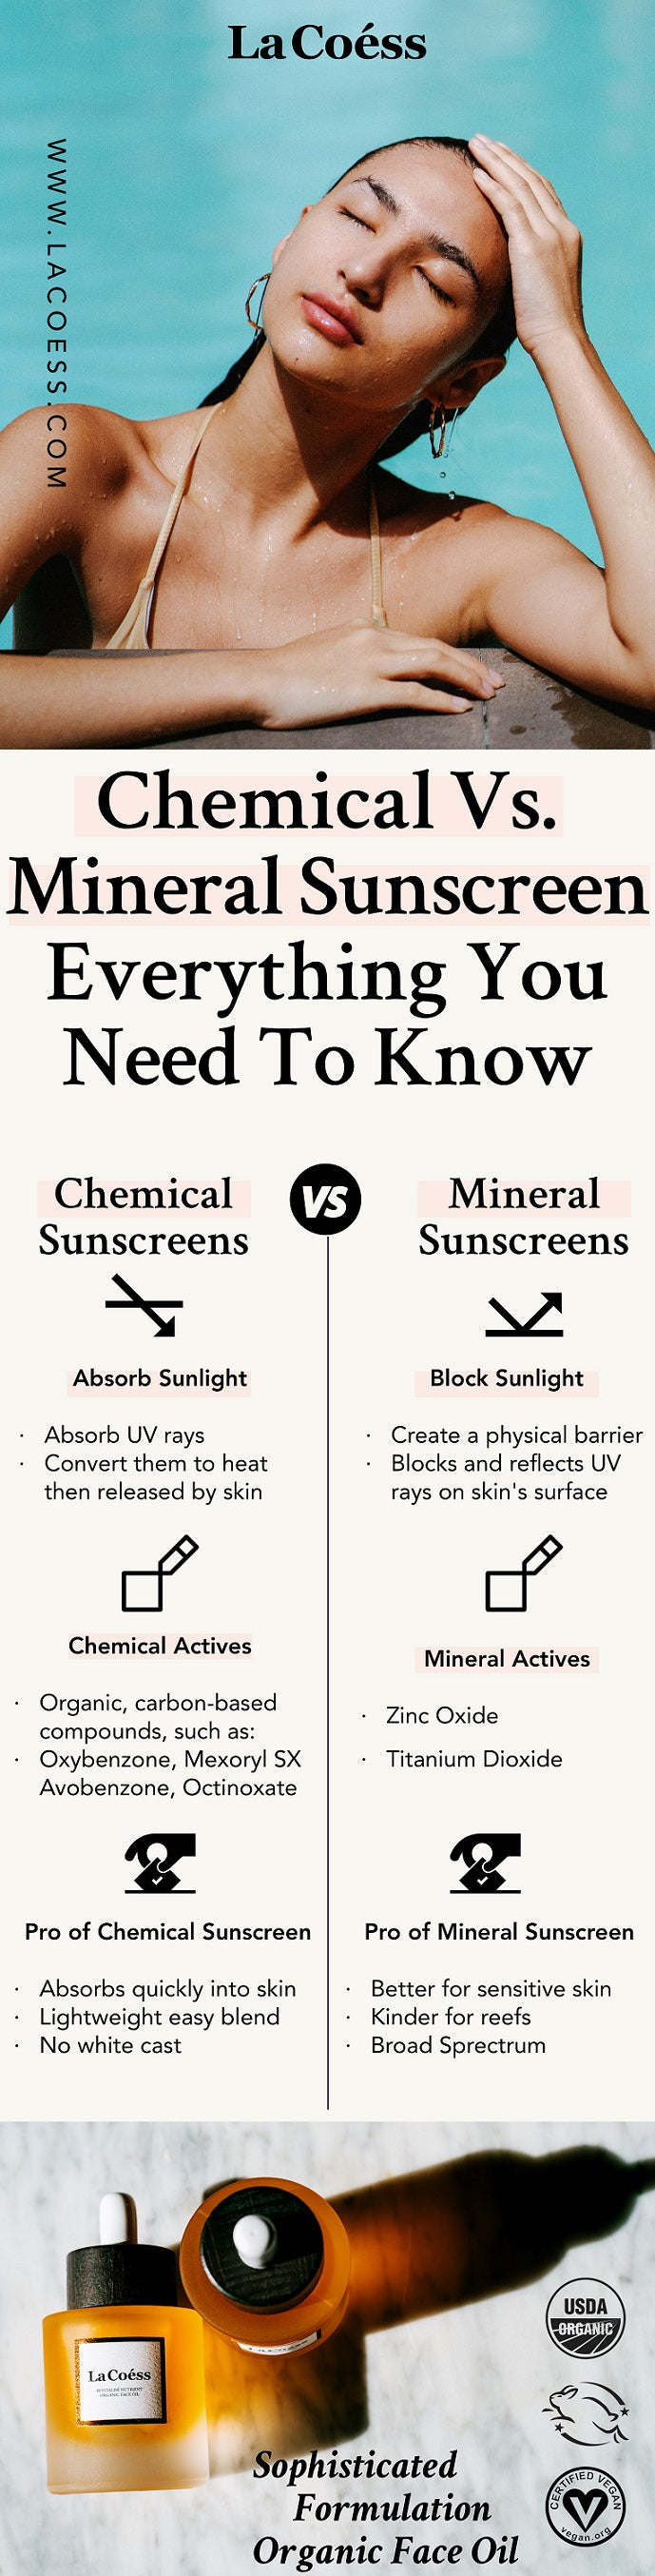 Chemical vs. Mineral Sunscreen: Everything You Need To Know